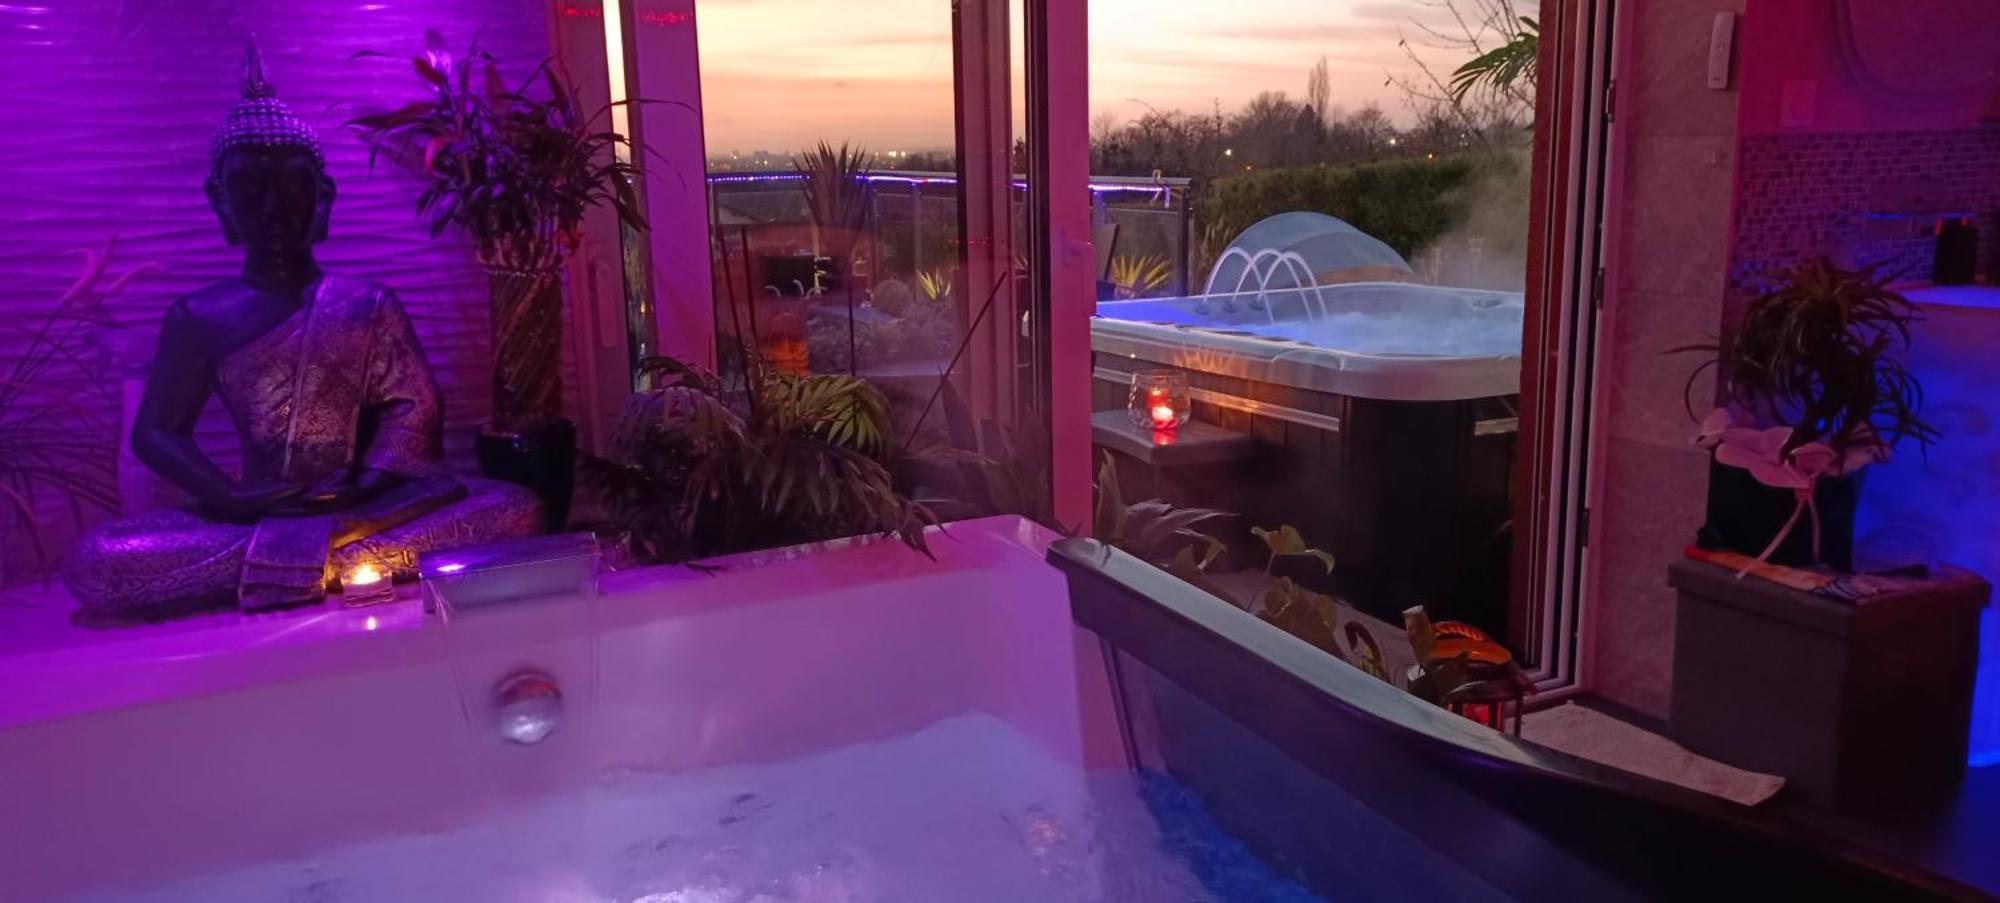 Spa De La Lune - Private Love Room Suite With Terrace And View - Air Conditioned- Double Jacuzzi - Sauna - King Size Bed - Free Wifi - Free Parking - Free Breakfast - Close To Cdg Airport And To The North Of Paris Clichy-sous-Bois Exterior photo